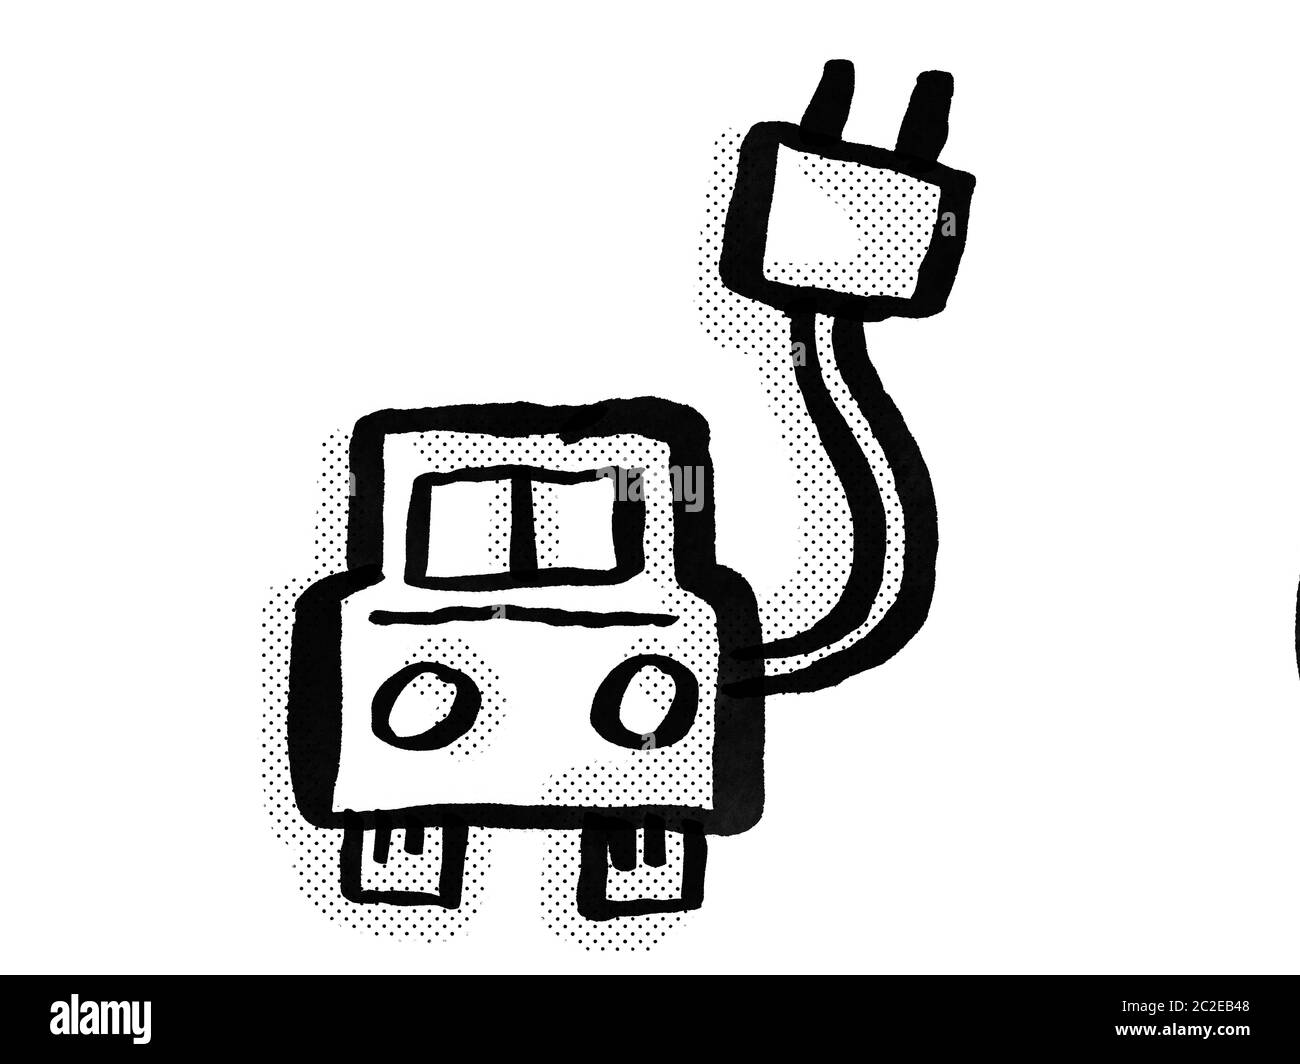 Retro cartoon style drawing of an electric vehicle (EV) charging station icon or symbol on isolated white background done in black and white Stock Photo